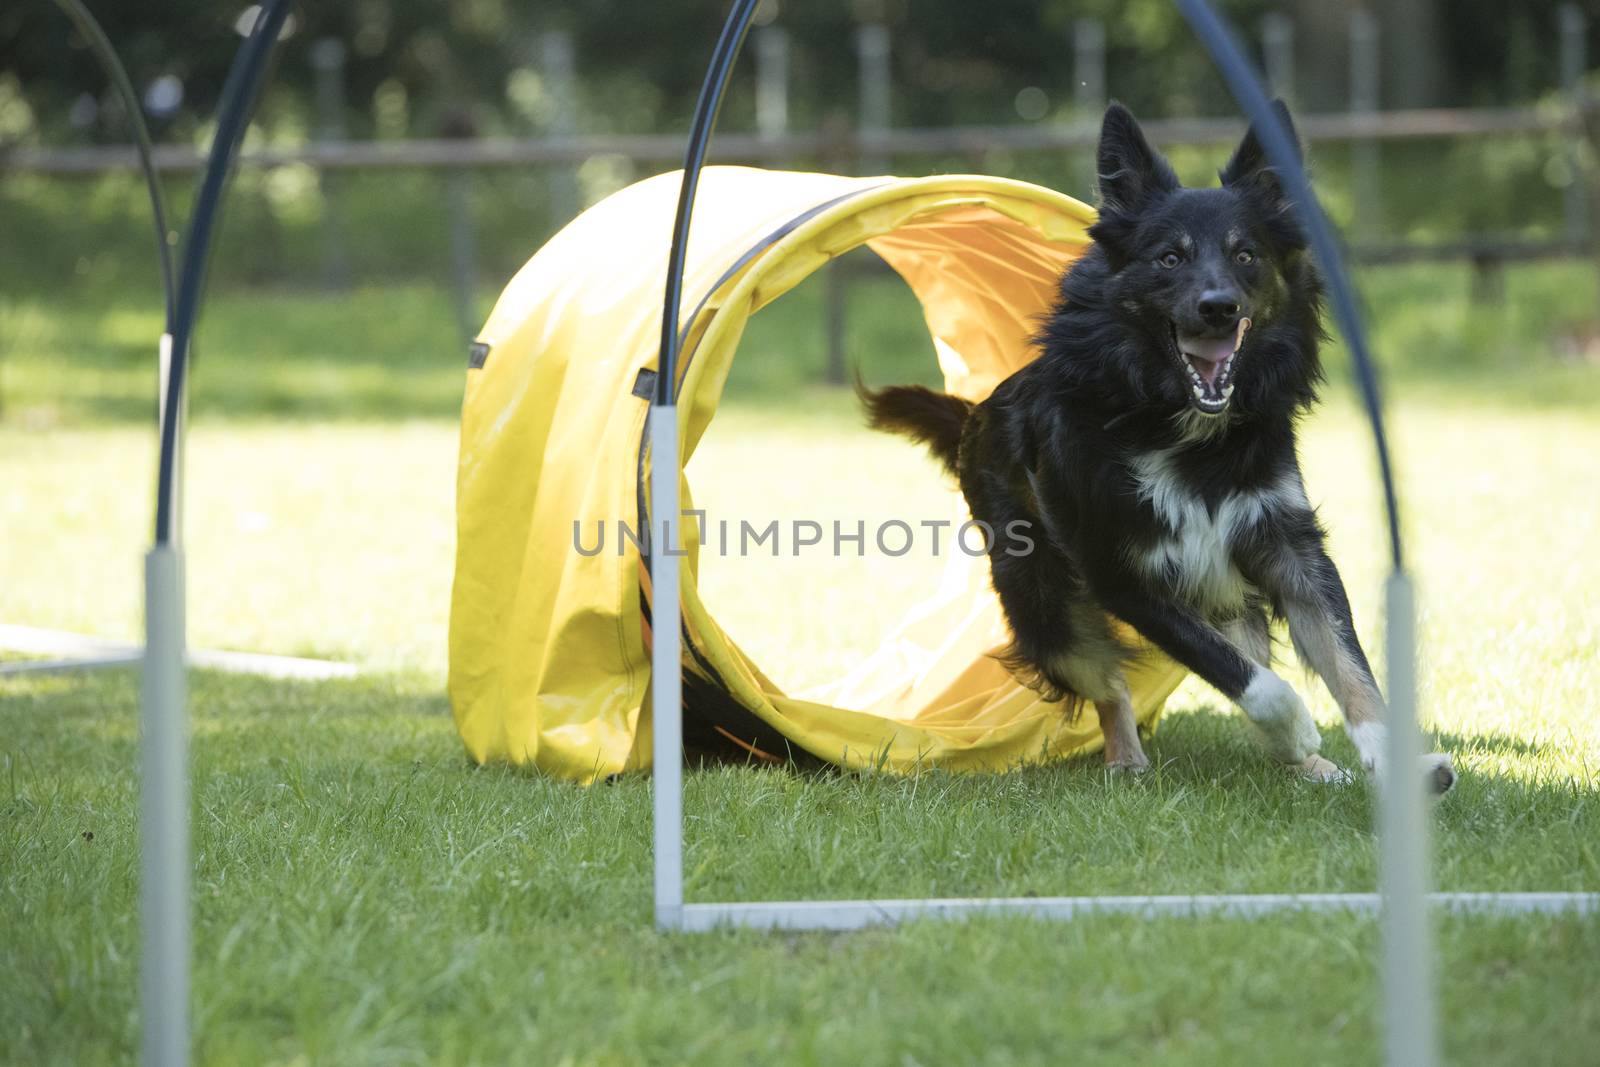 Dog, Border Collie, running agility and hooper training